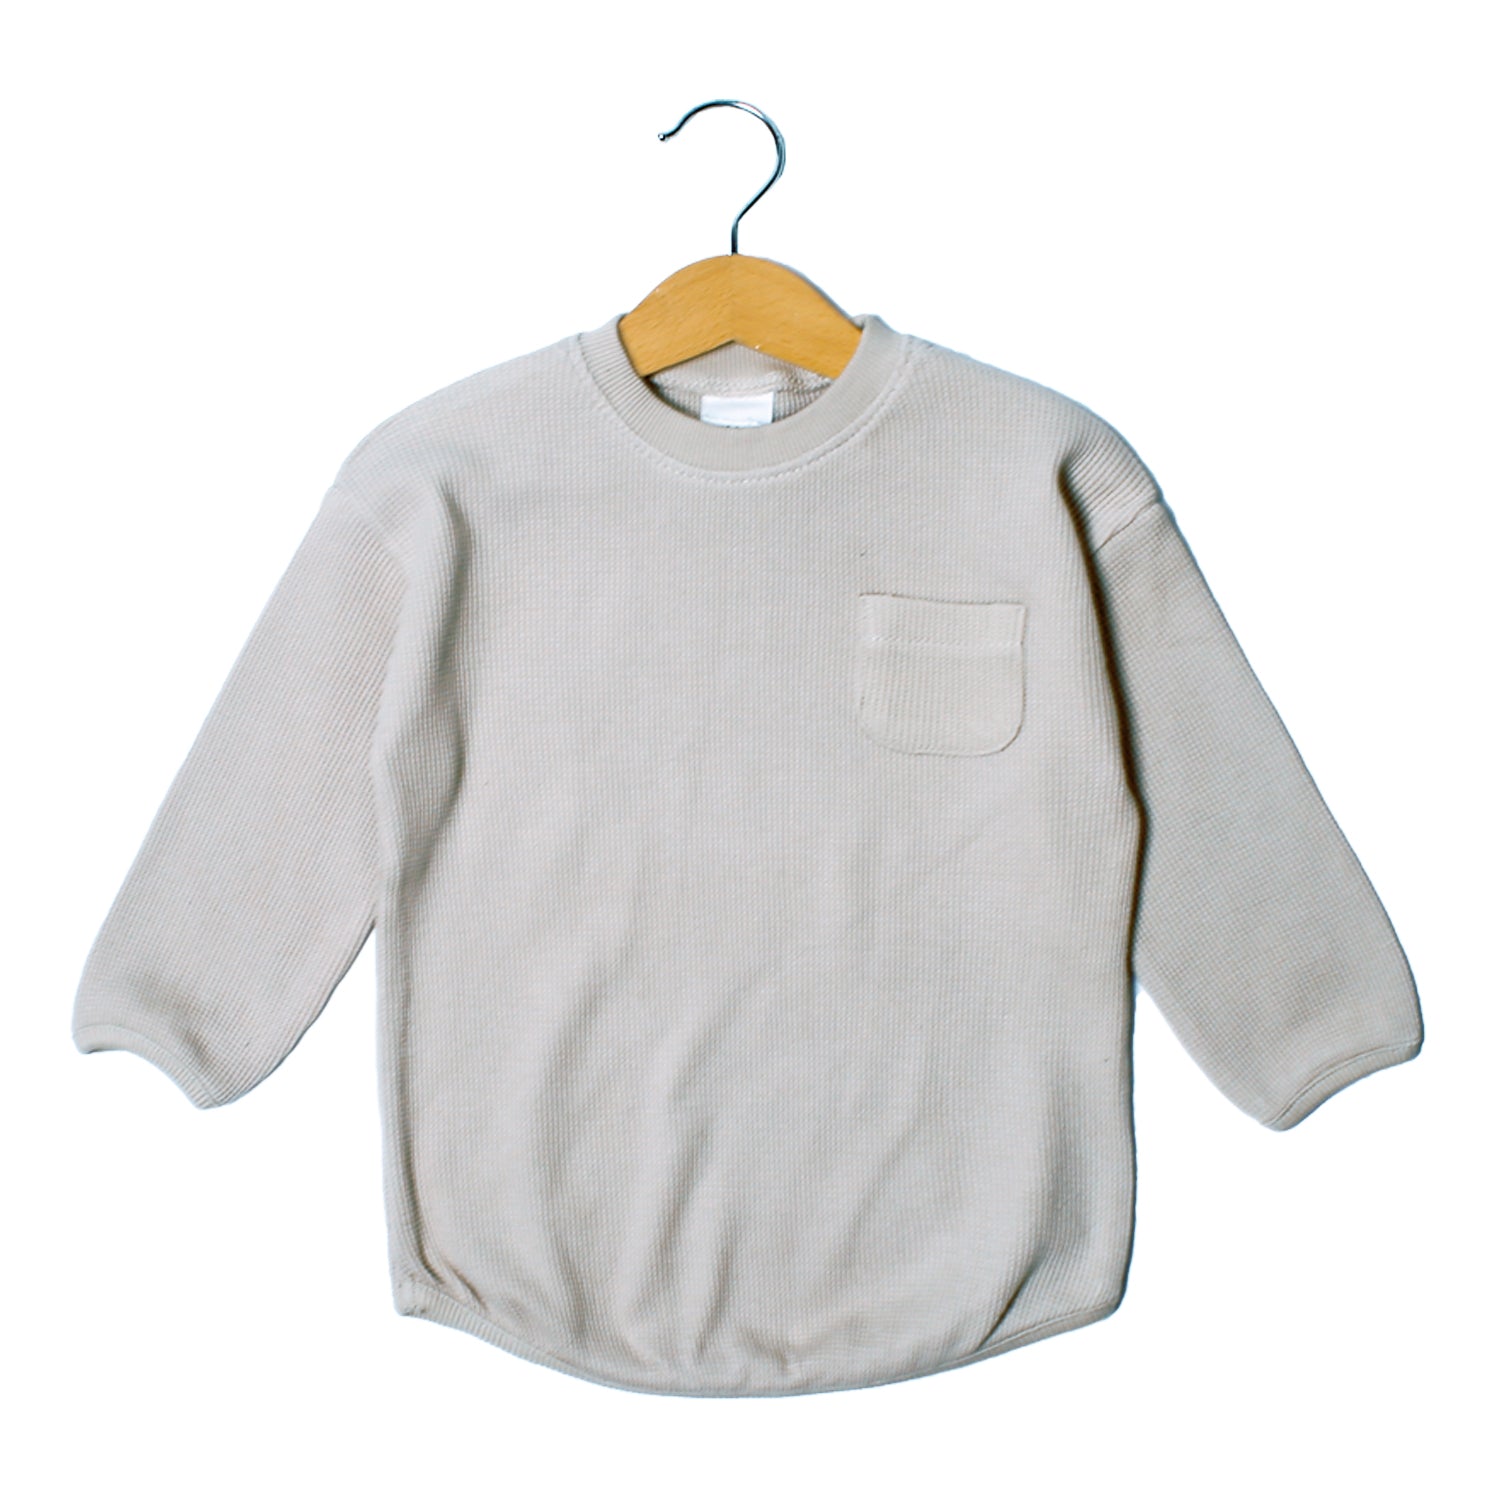 NEW OFF WHITE WITH POCKET THERMAL SWEATSHIRT